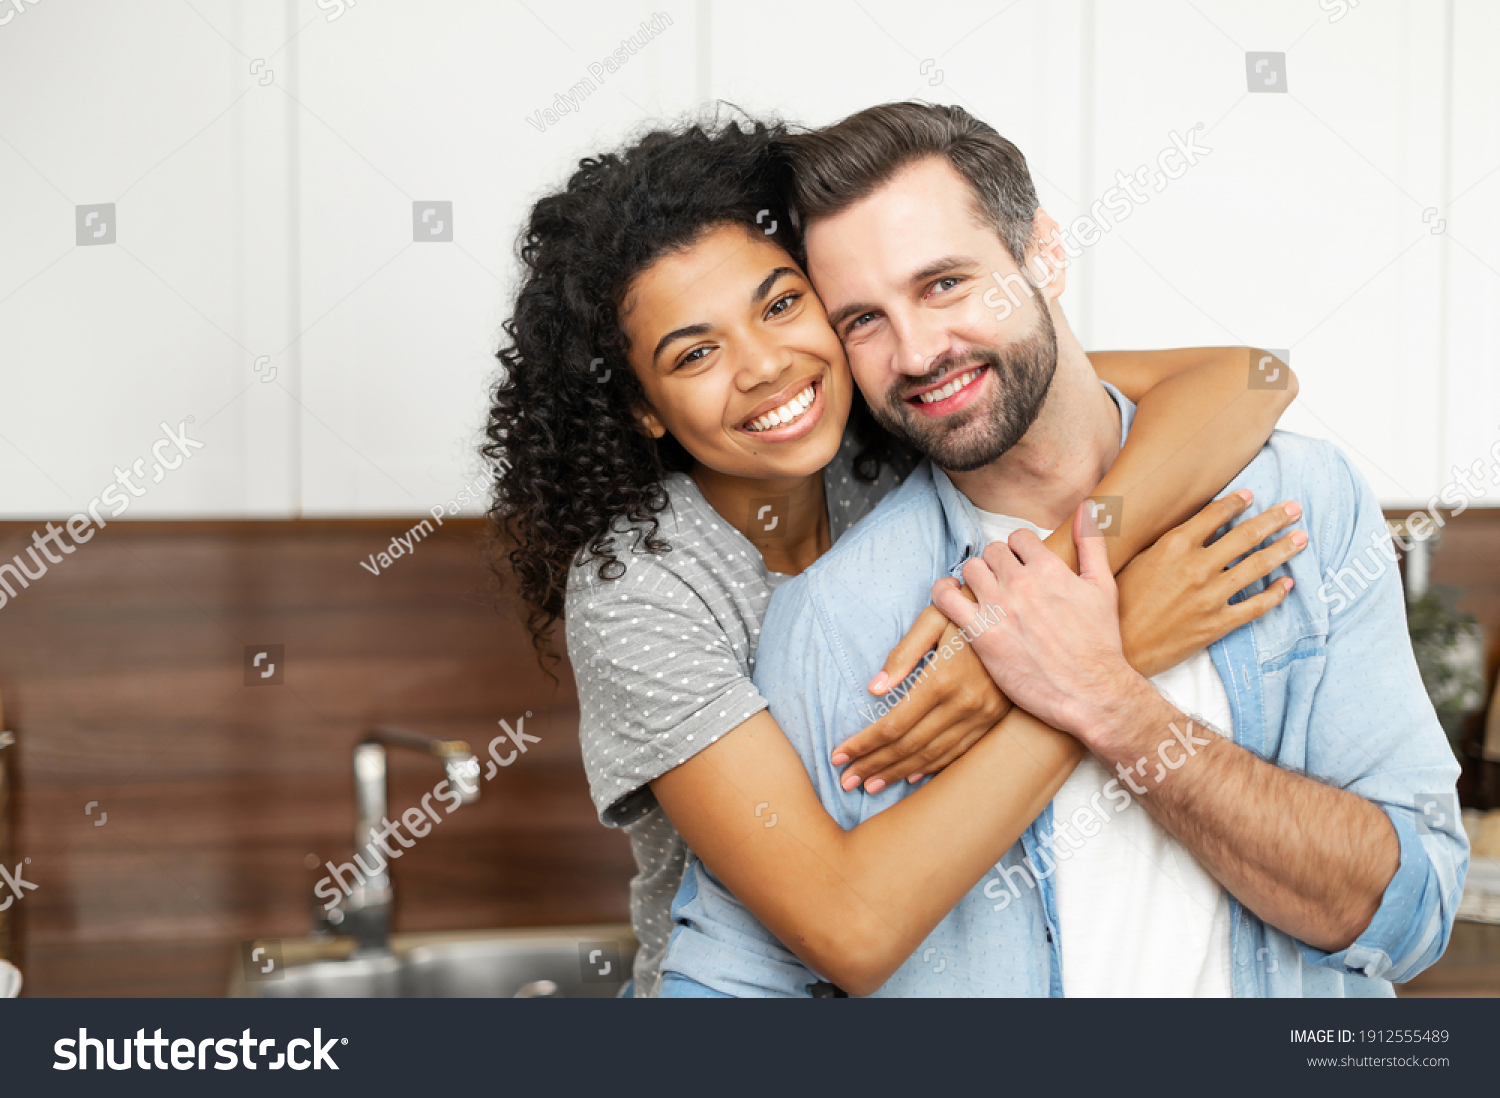 Close-up of happy interracial couple posing over blurred kitchen background, happy owners of new flat smiling and looking at the camera, young African American woman hugging handsome man from behind #1912555489